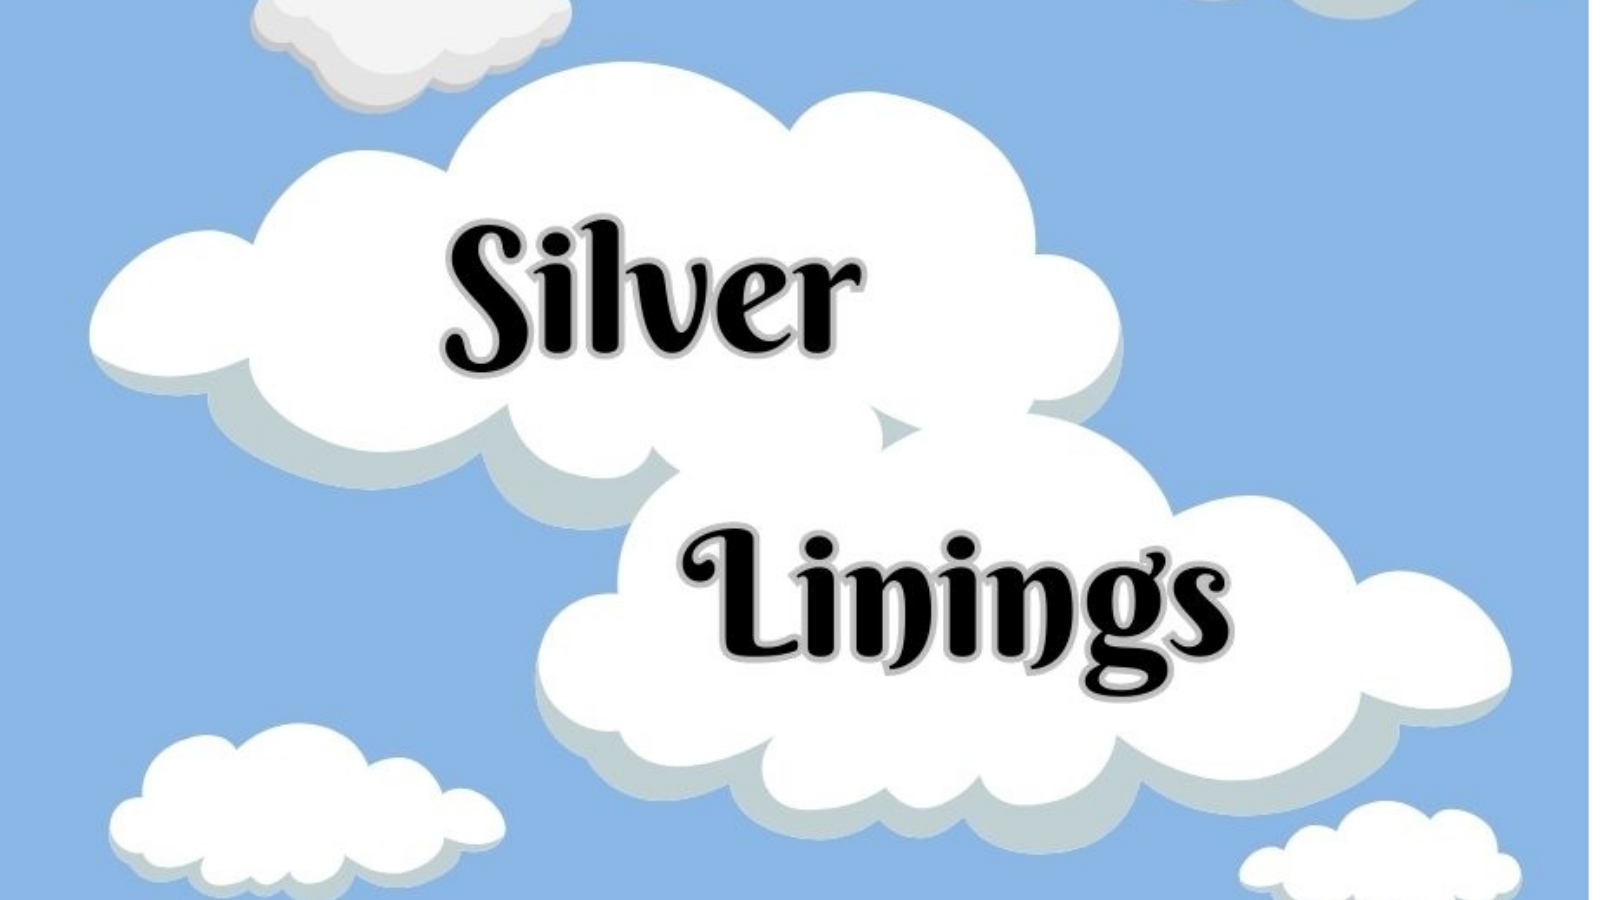 Silver Linings Counseling